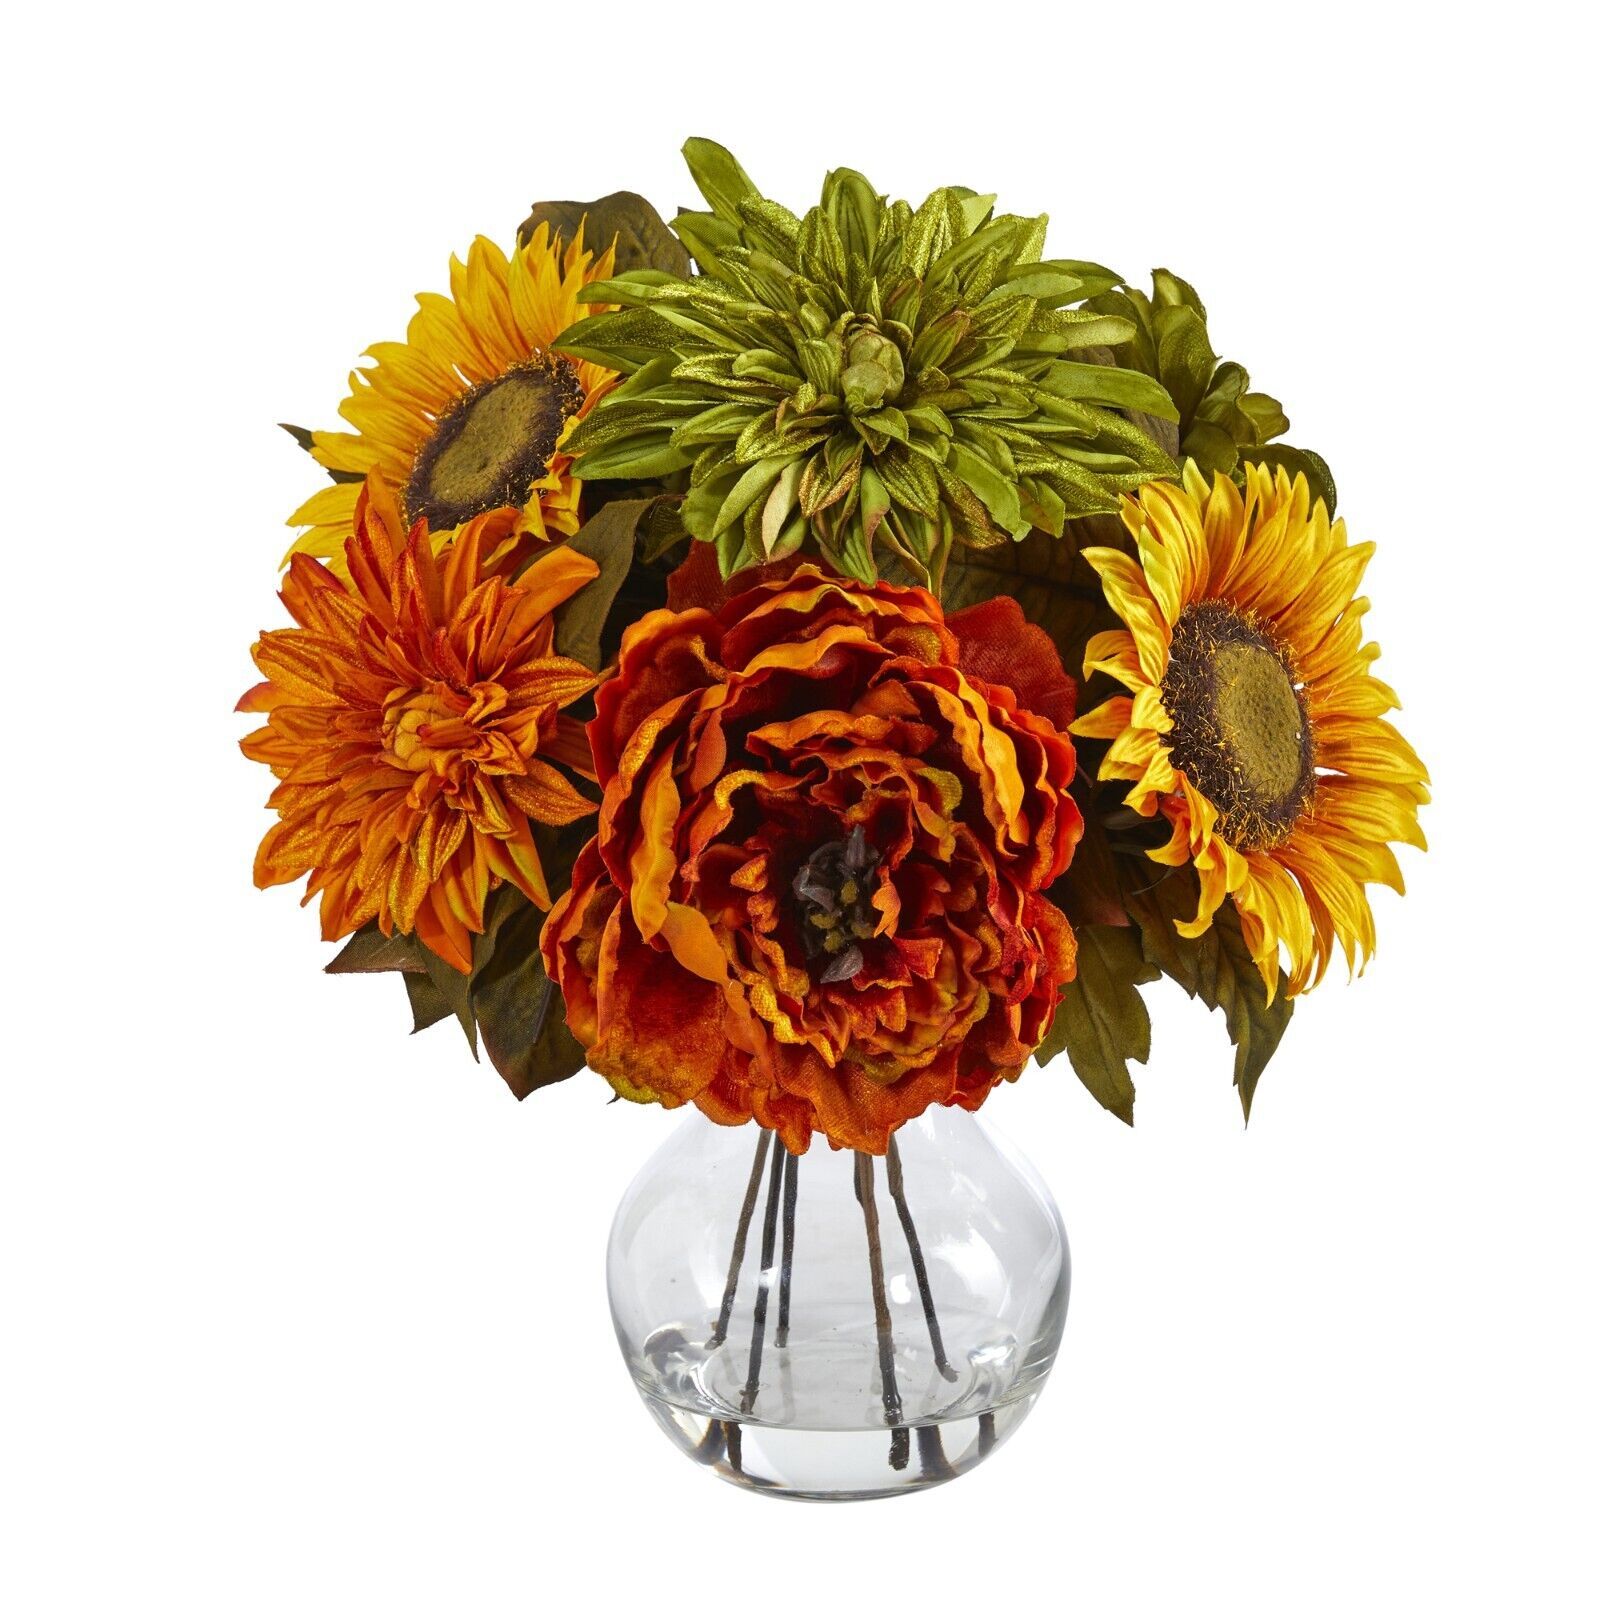 12” Peony, Dahlia And Sunflower Artificial Arrangement In Glass Vase - $76.12